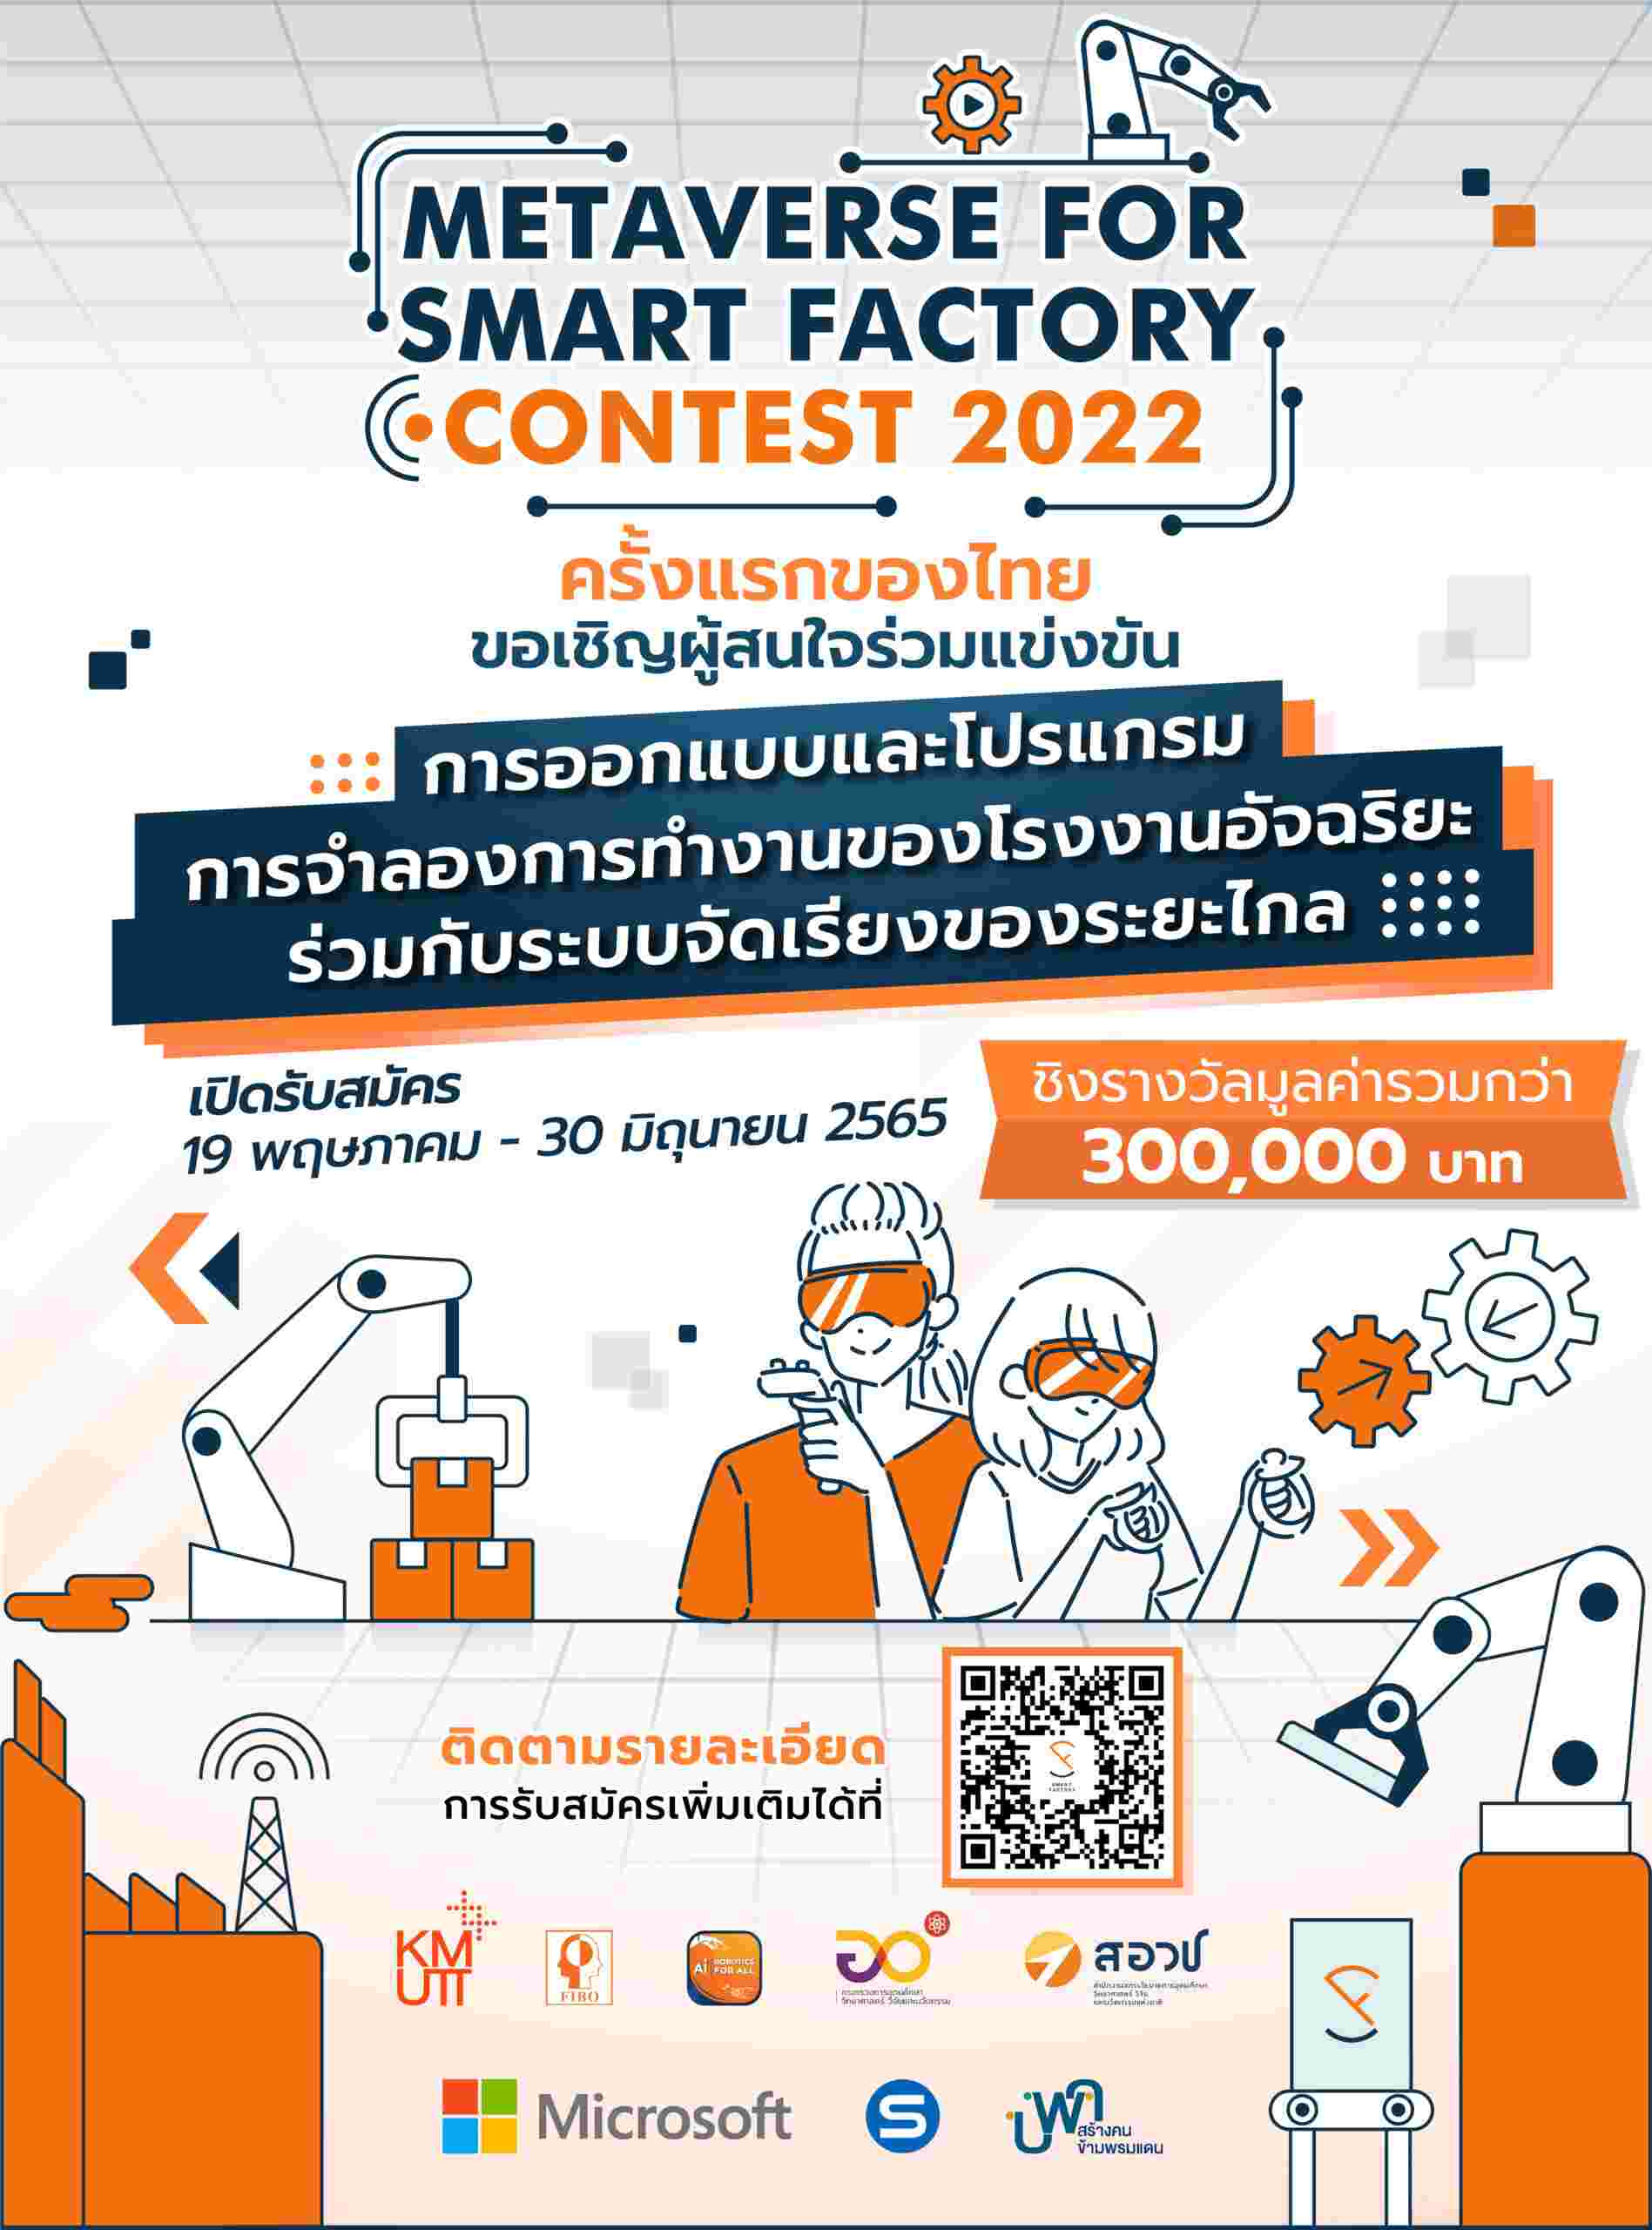 Metaverse for Smart Factory Contest 2022